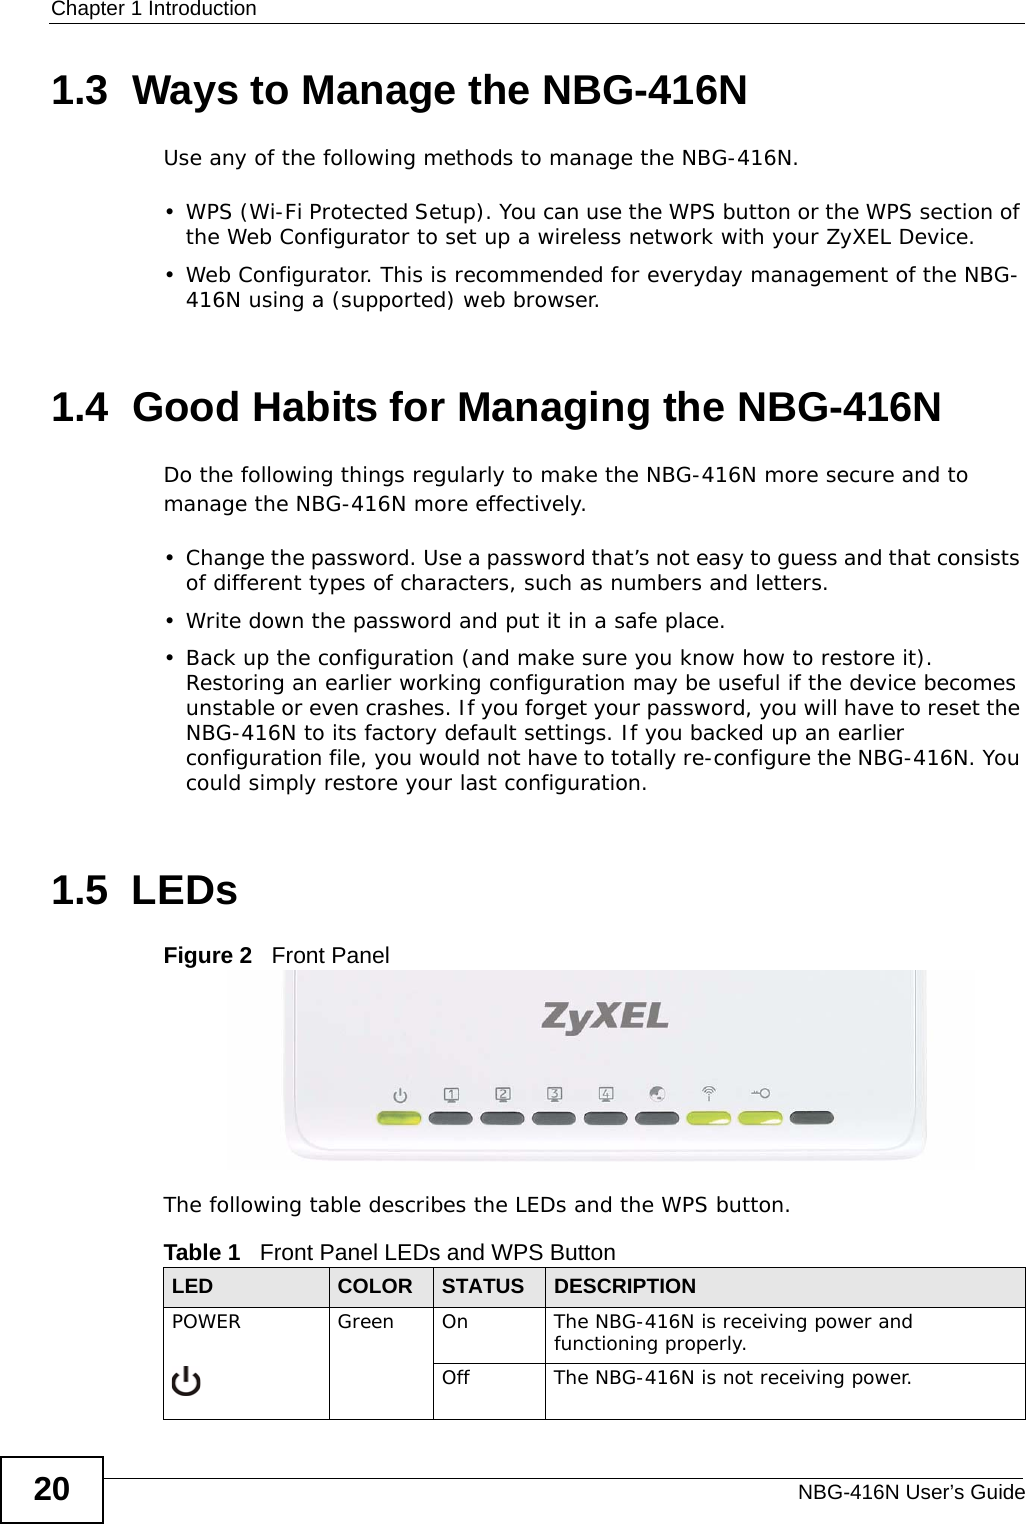 Chapter 1 IntroductionNBG-416N User’s Guide201.3  Ways to Manage the NBG-416NUse any of the following methods to manage the NBG-416N.• WPS (Wi-Fi Protected Setup). You can use the WPS button or the WPS section of the Web Configurator to set up a wireless network with your ZyXEL Device.• Web Configurator. This is recommended for everyday management of the NBG-416N using a (supported) web browser.1.4  Good Habits for Managing the NBG-416NDo the following things regularly to make the NBG-416N more secure and to manage the NBG-416N more effectively.• Change the password. Use a password that’s not easy to guess and that consists of different types of characters, such as numbers and letters.• Write down the password and put it in a safe place.• Back up the configuration (and make sure you know how to restore it). Restoring an earlier working configuration may be useful if the device becomes unstable or even crashes. If you forget your password, you will have to reset the NBG-416N to its factory default settings. If you backed up an earlier configuration file, you would not have to totally re-configure the NBG-416N. You could simply restore your last configuration.1.5  LEDsFigure 2   Front PanelThe following table describes the LEDs and the WPS button.Table 1   Front Panel LEDs and WPS ButtonLED COLOR STATUS DESCRIPTIONPOWER Green On The NBG-416N is receiving power and functioning properly. Off The NBG-416N is not receiving power.